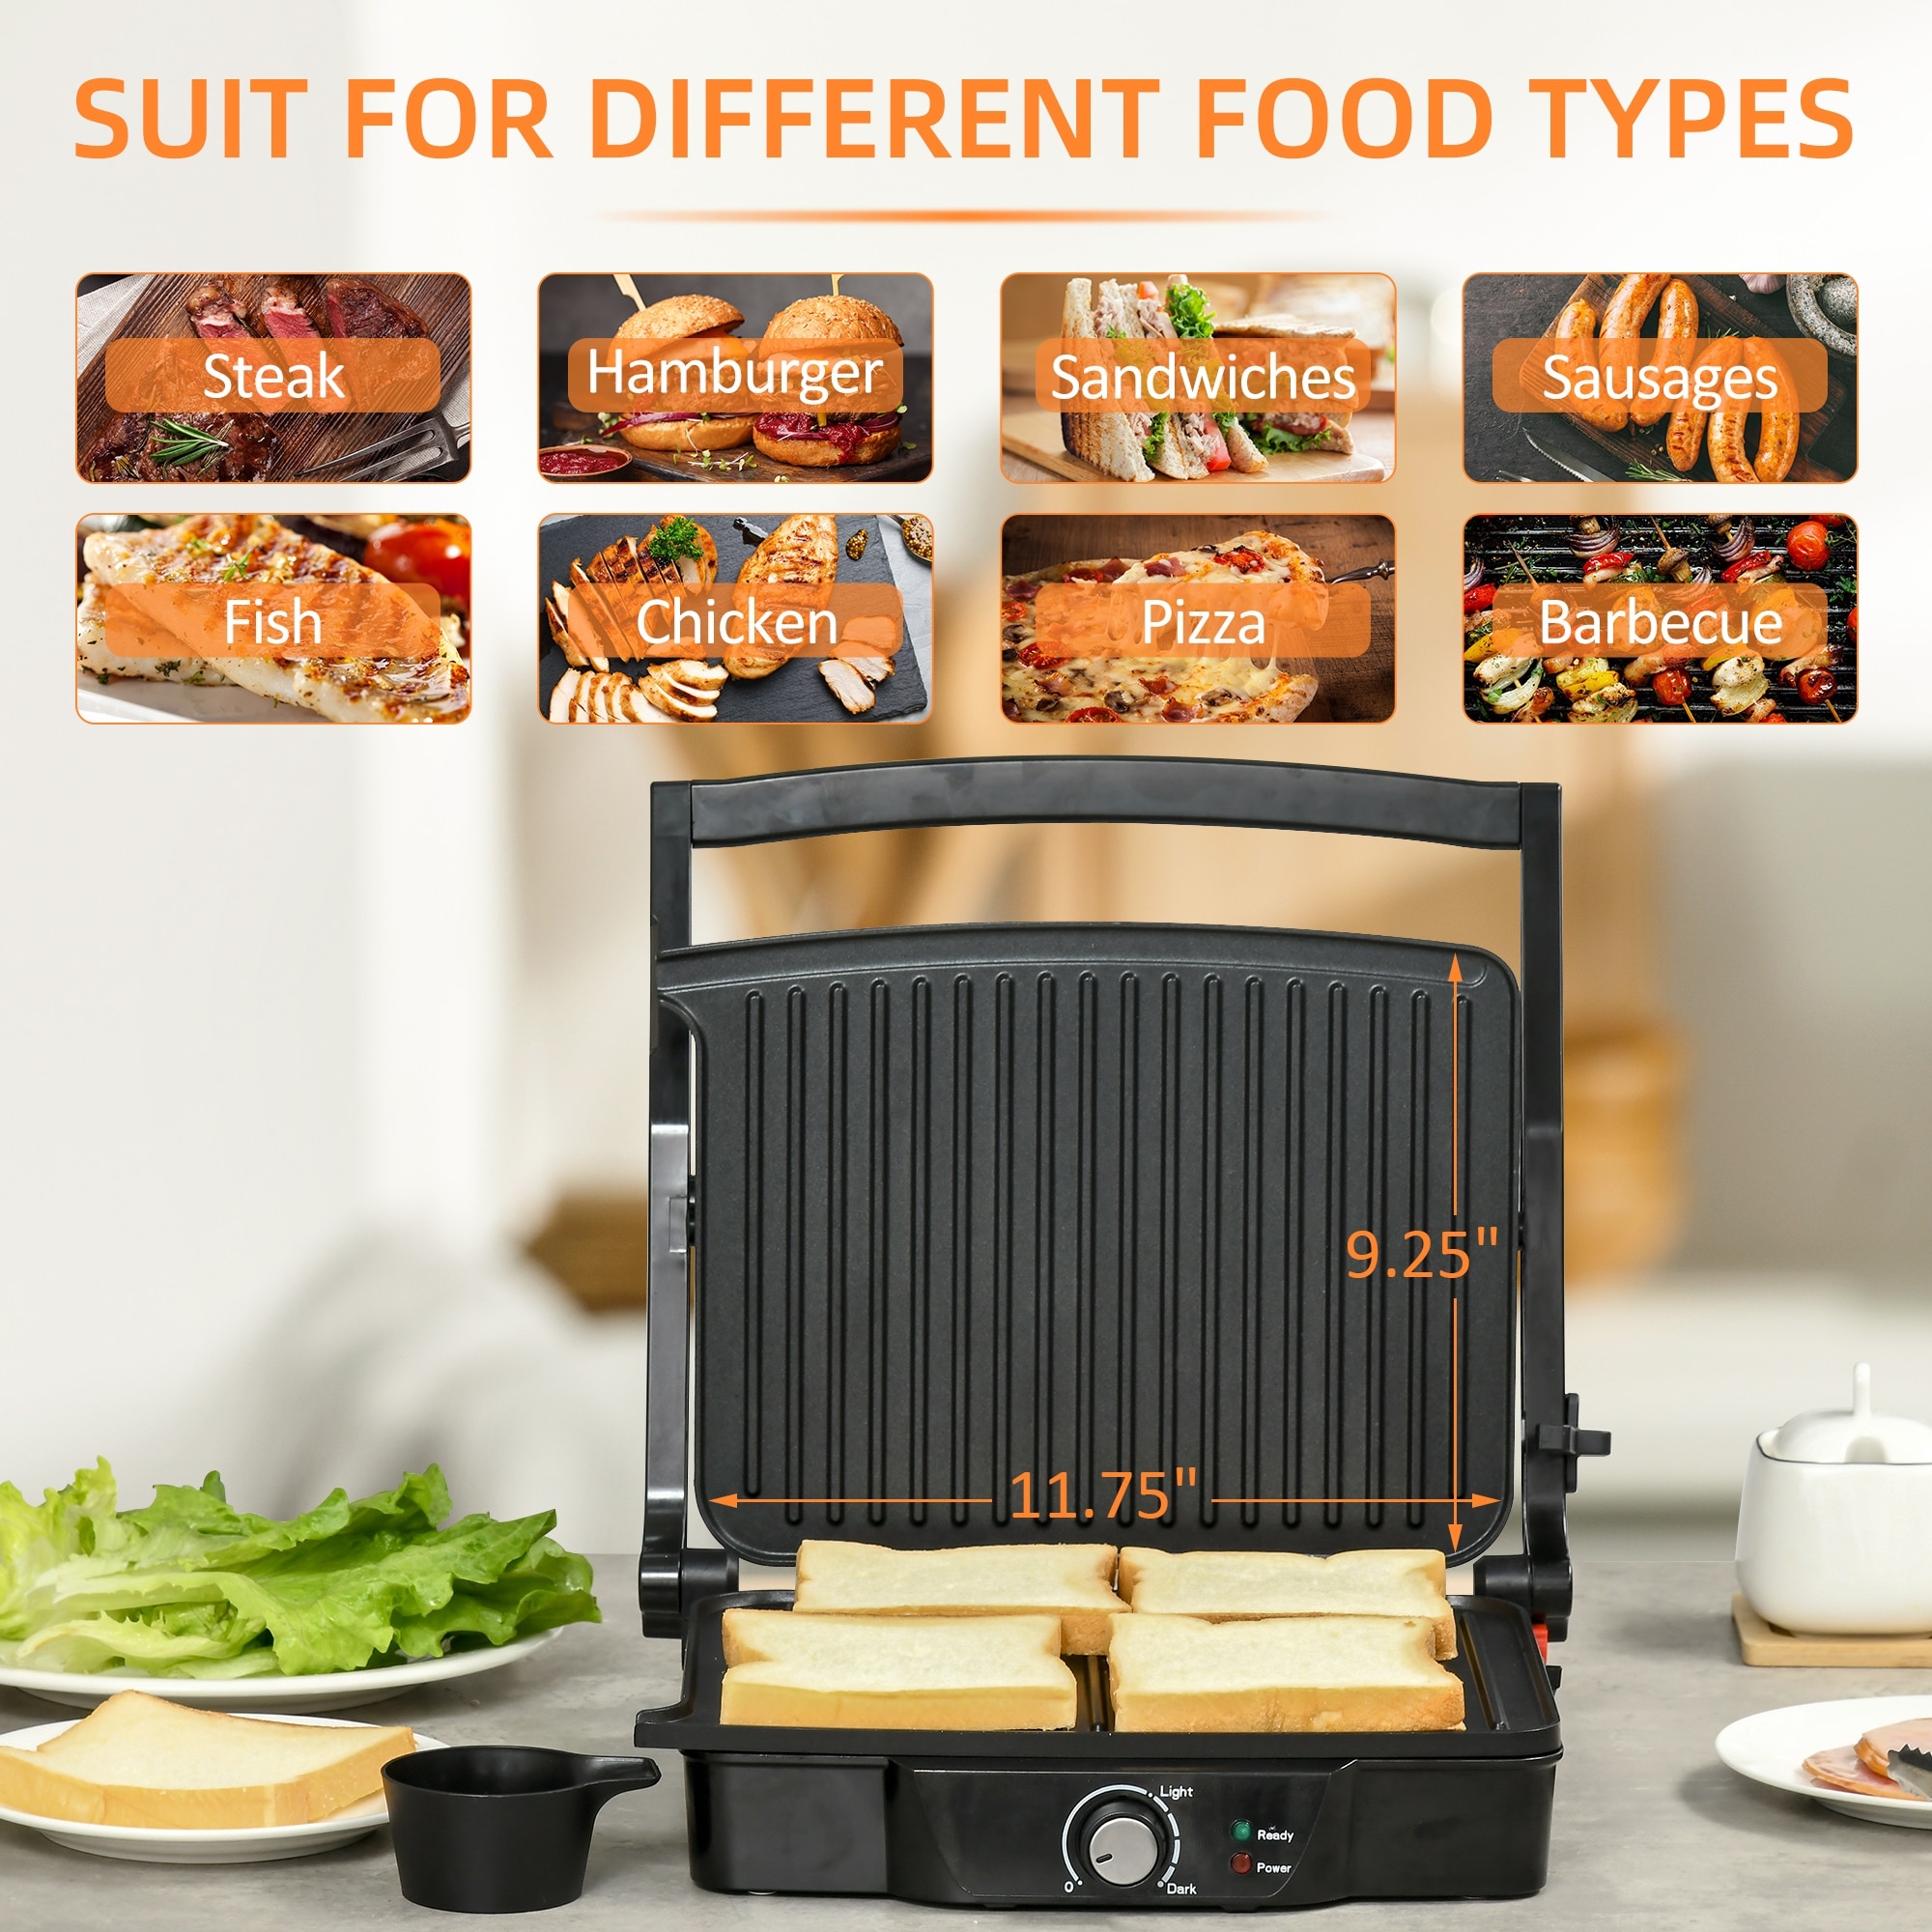 https://ak1.ostkcdn.com/images/products/is/images/direct/1917c641ae648a51a758e48006874473dea18014/HOMCOM-4-Slice-Panini-Press-Grill%2C-Stainless-Steel-Sandwich-Maker-with-Non-Stick-Double-Plates%2C-Locking-Lids-and-Drip-Tray.jpg